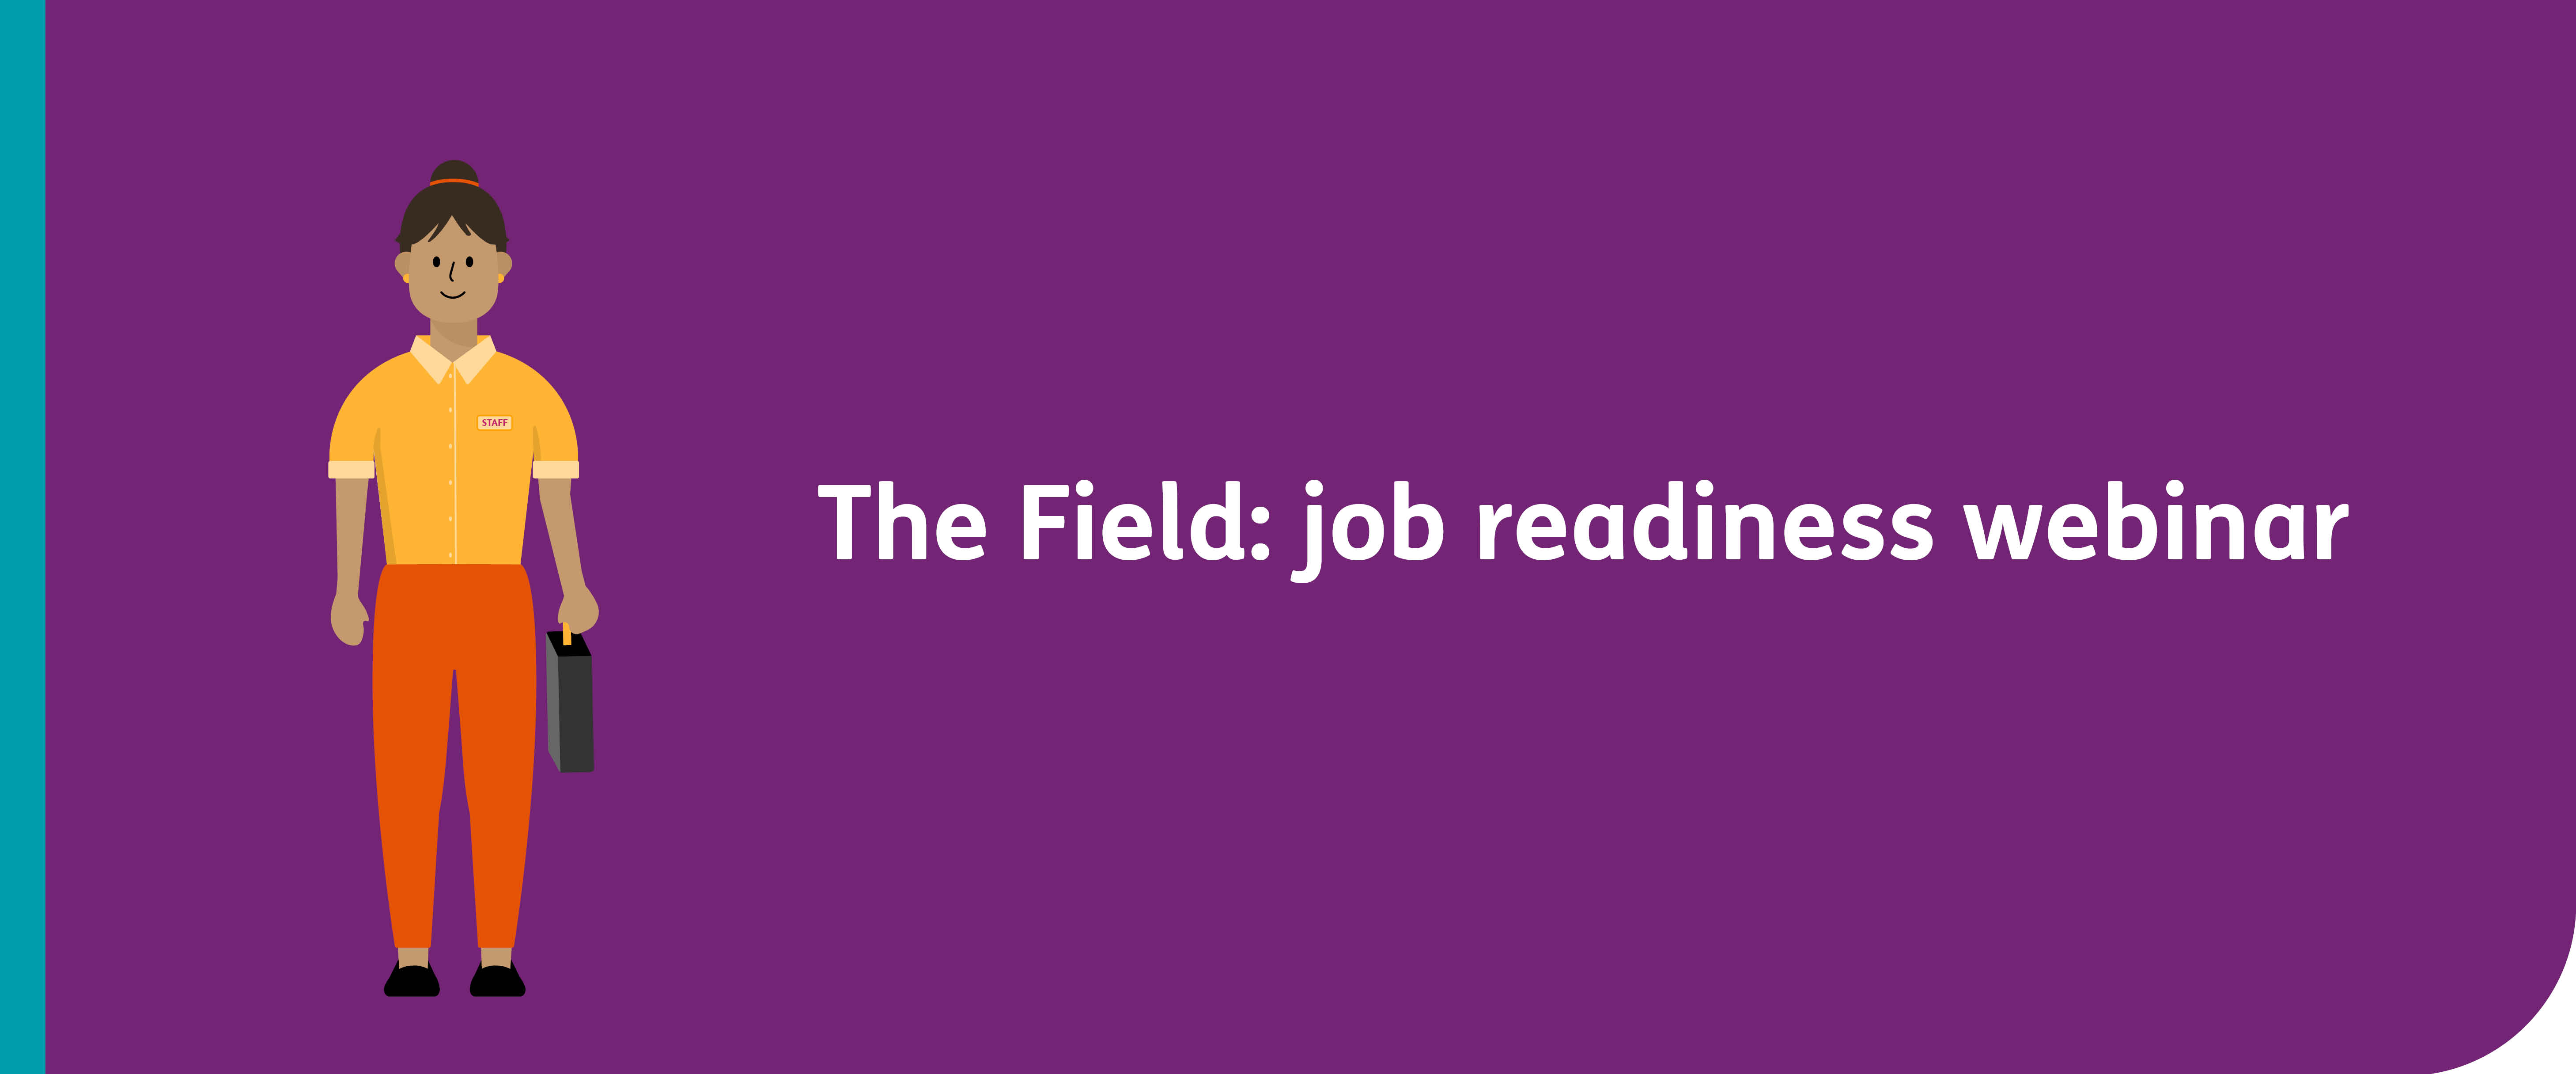 The Field: job readiness webinar with a cartoon of a person going to work